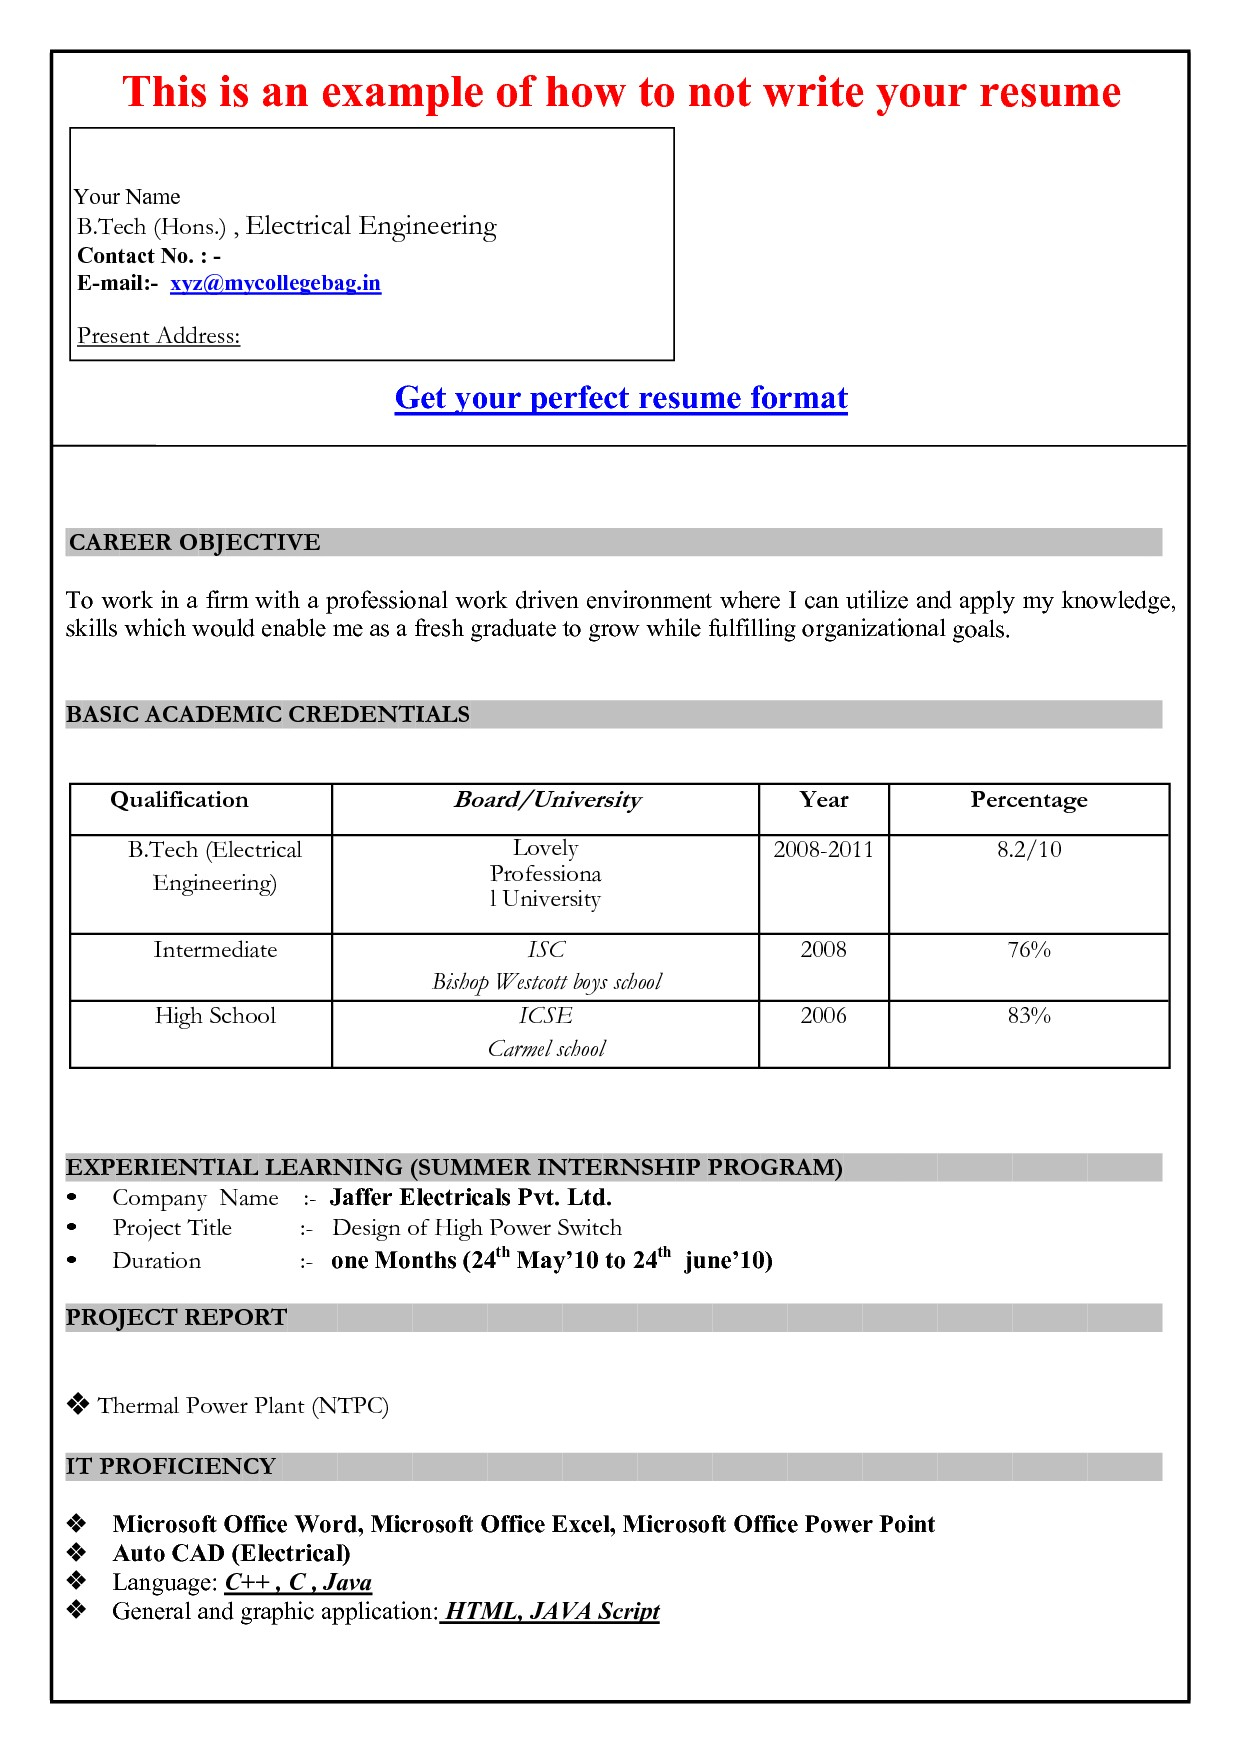 Resume Template Microsoft Word 2007 | Ckum.ca Intended For Resume Templates Word 2007